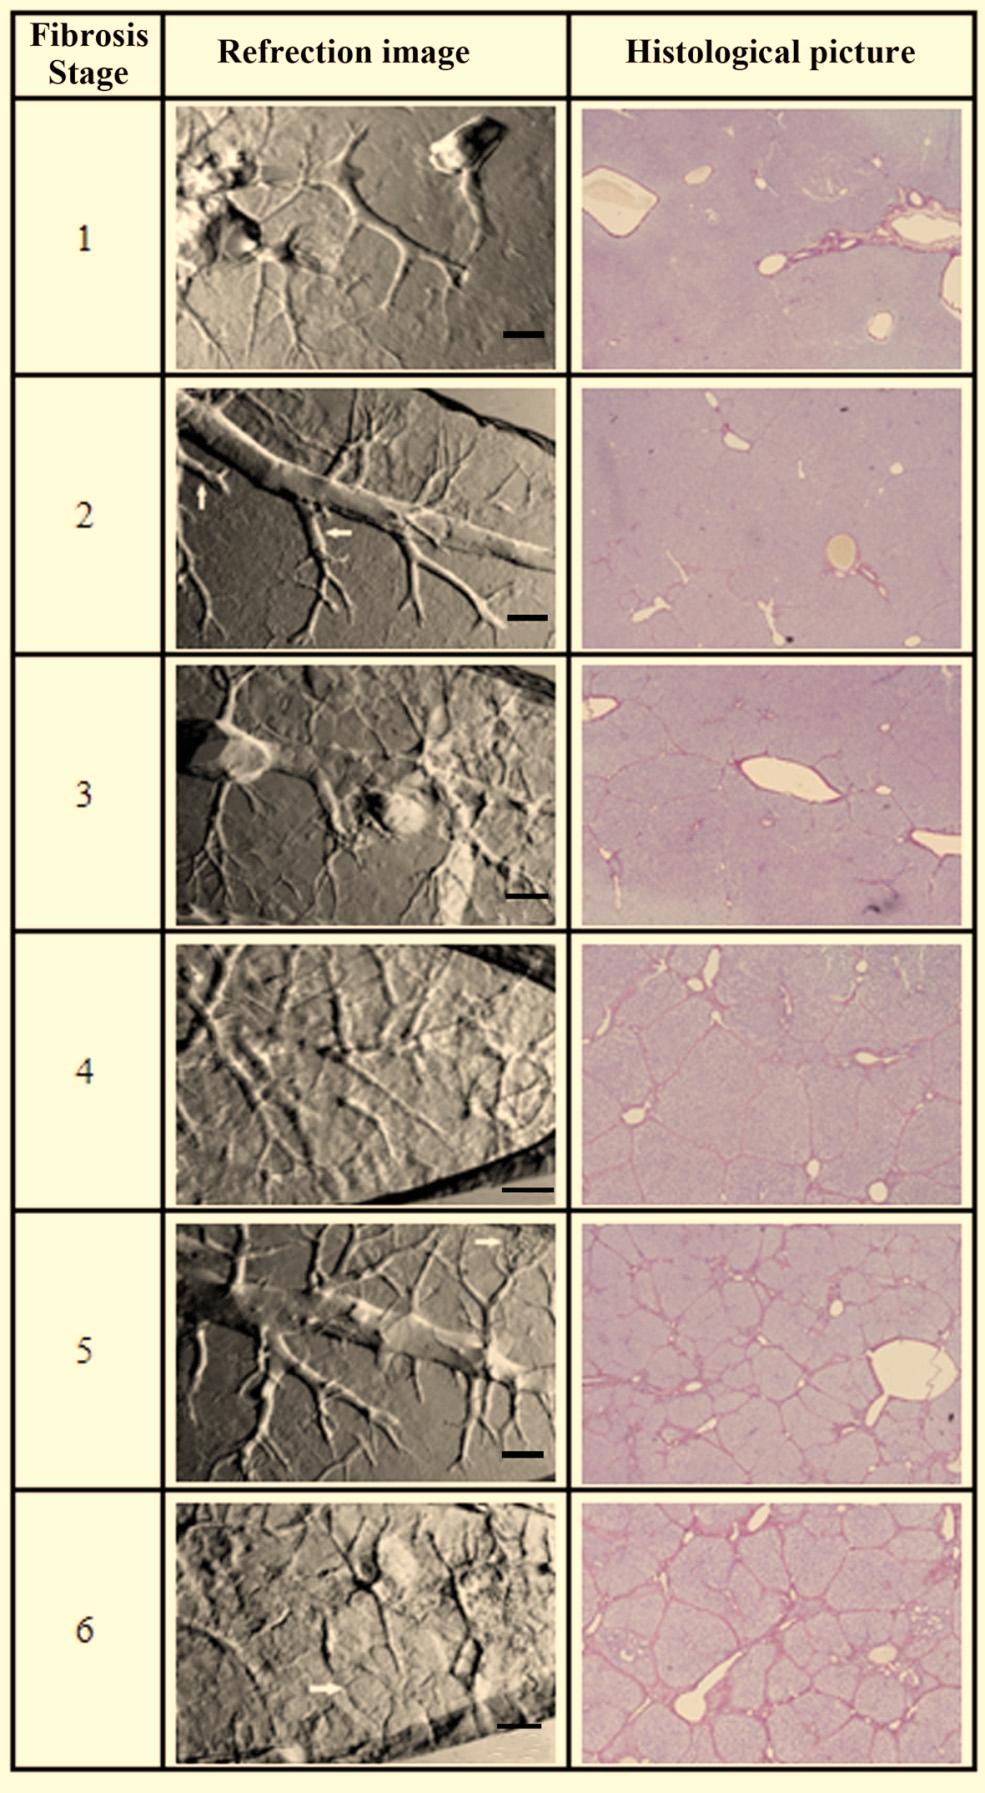 22 The Open Medical Informatics Journal, 2011, Volume 5 Zhang and Luo Fig. (3). The refraction images of hepatic fibrosis samples and the corresponding histological images from stage one to six.